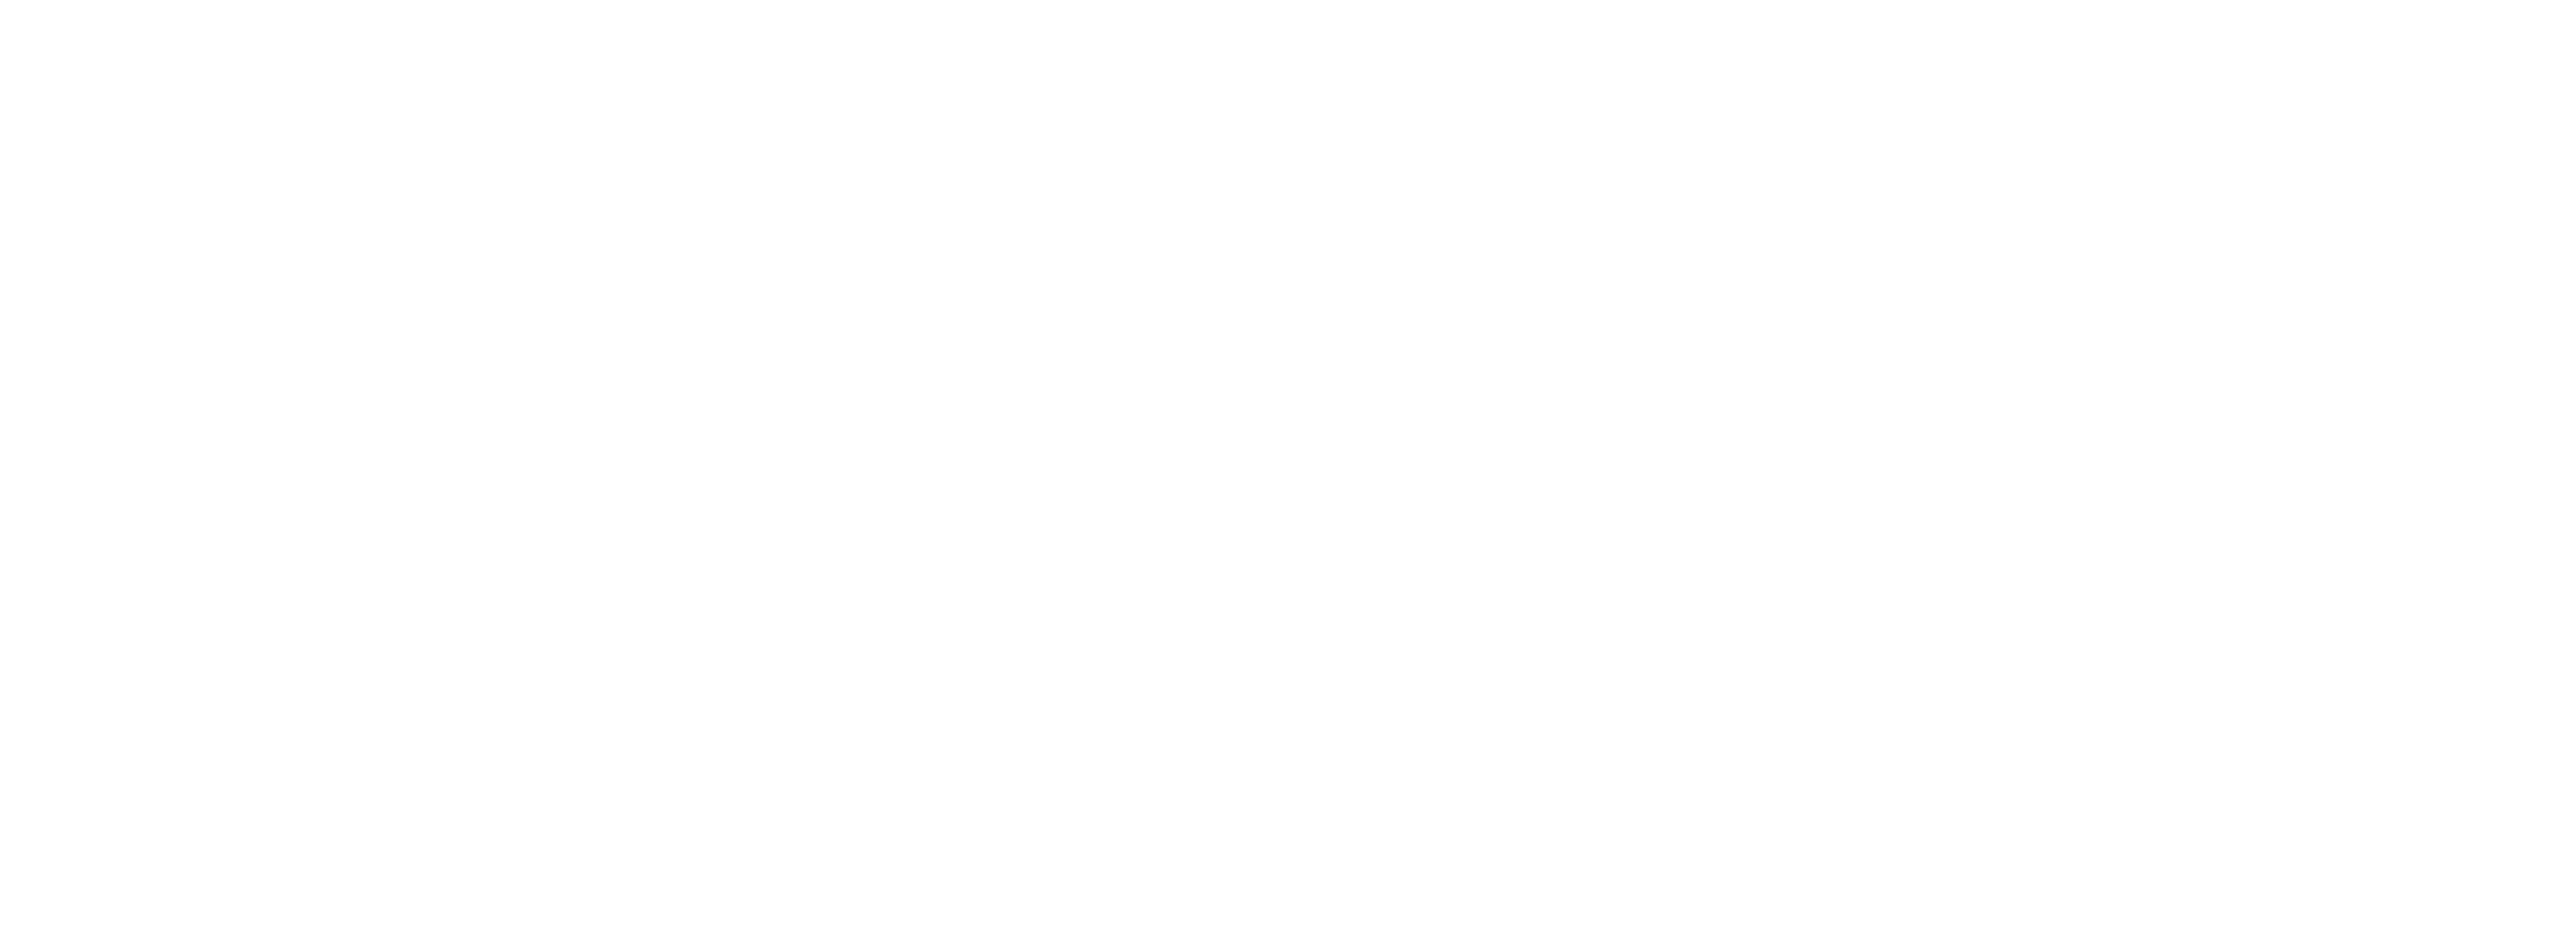 American Connection Corps logo